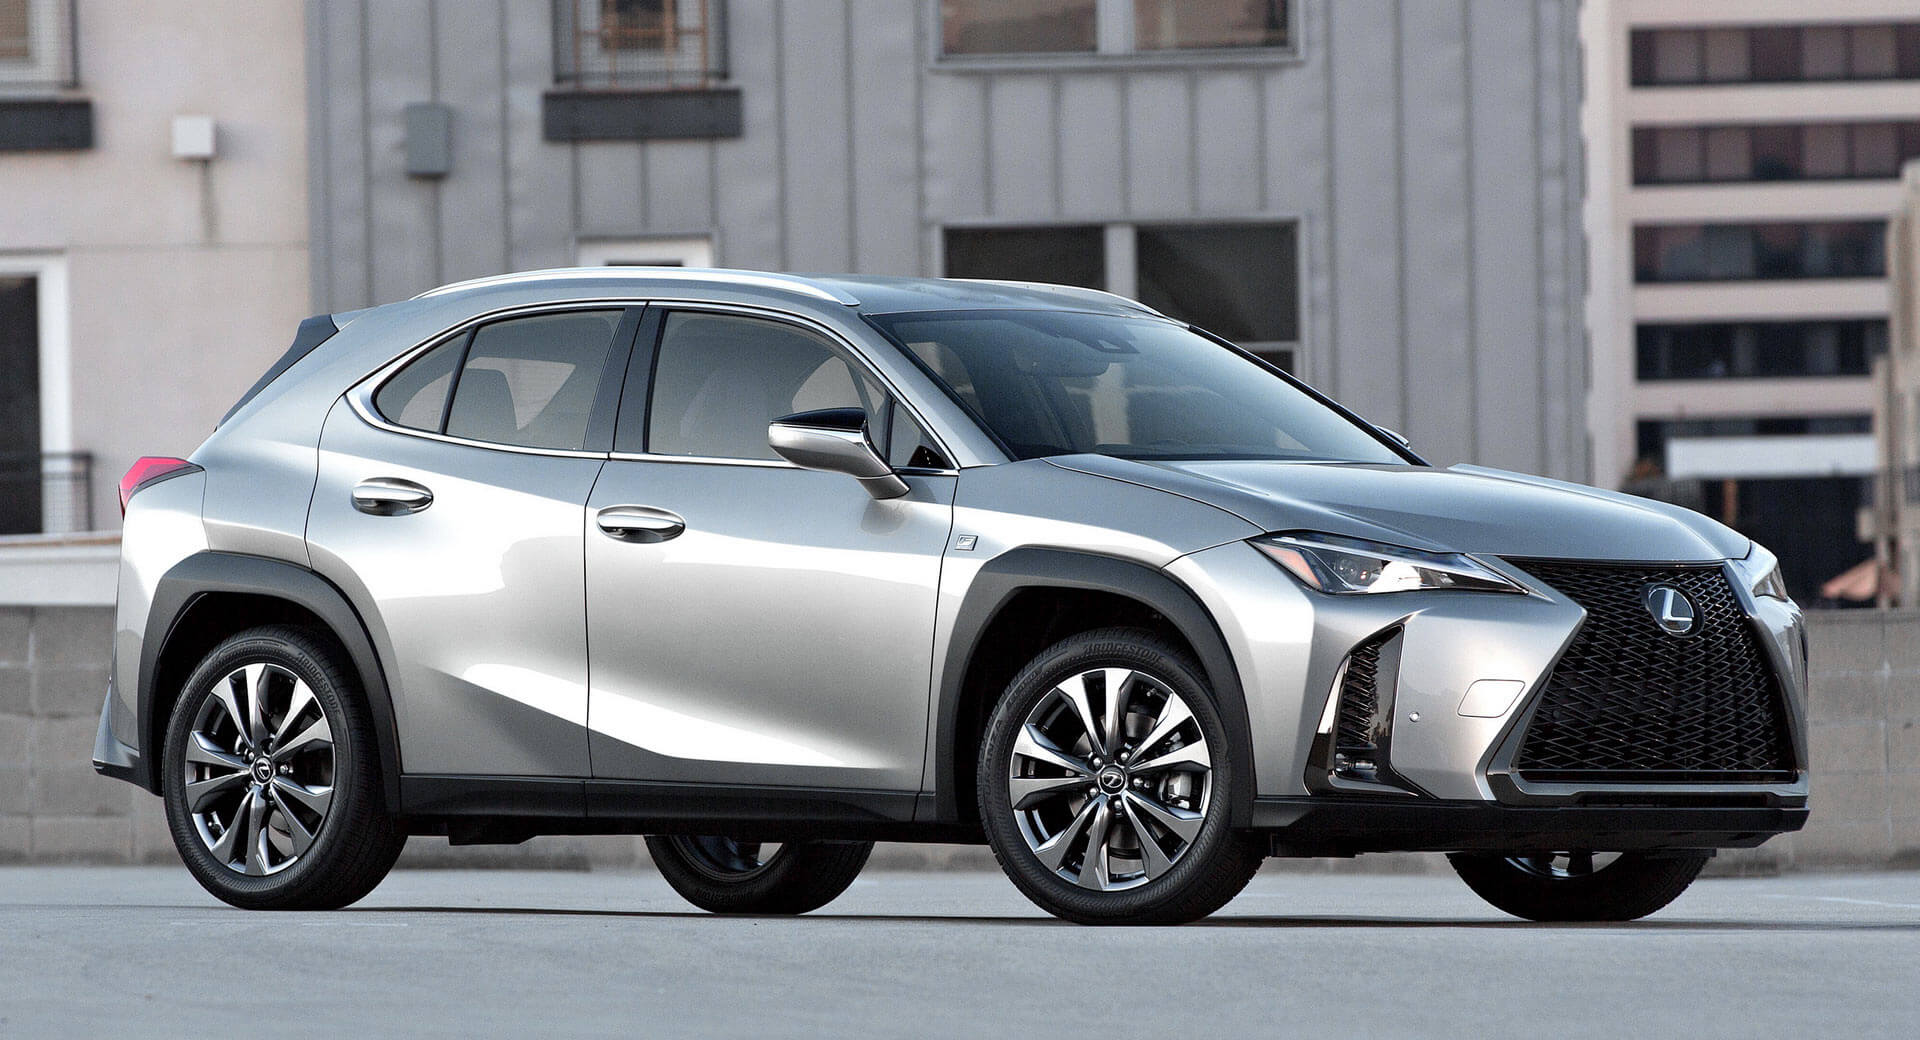 2019 Lexus UX Small SUV Gets Up To 168HP In U.S., Available With